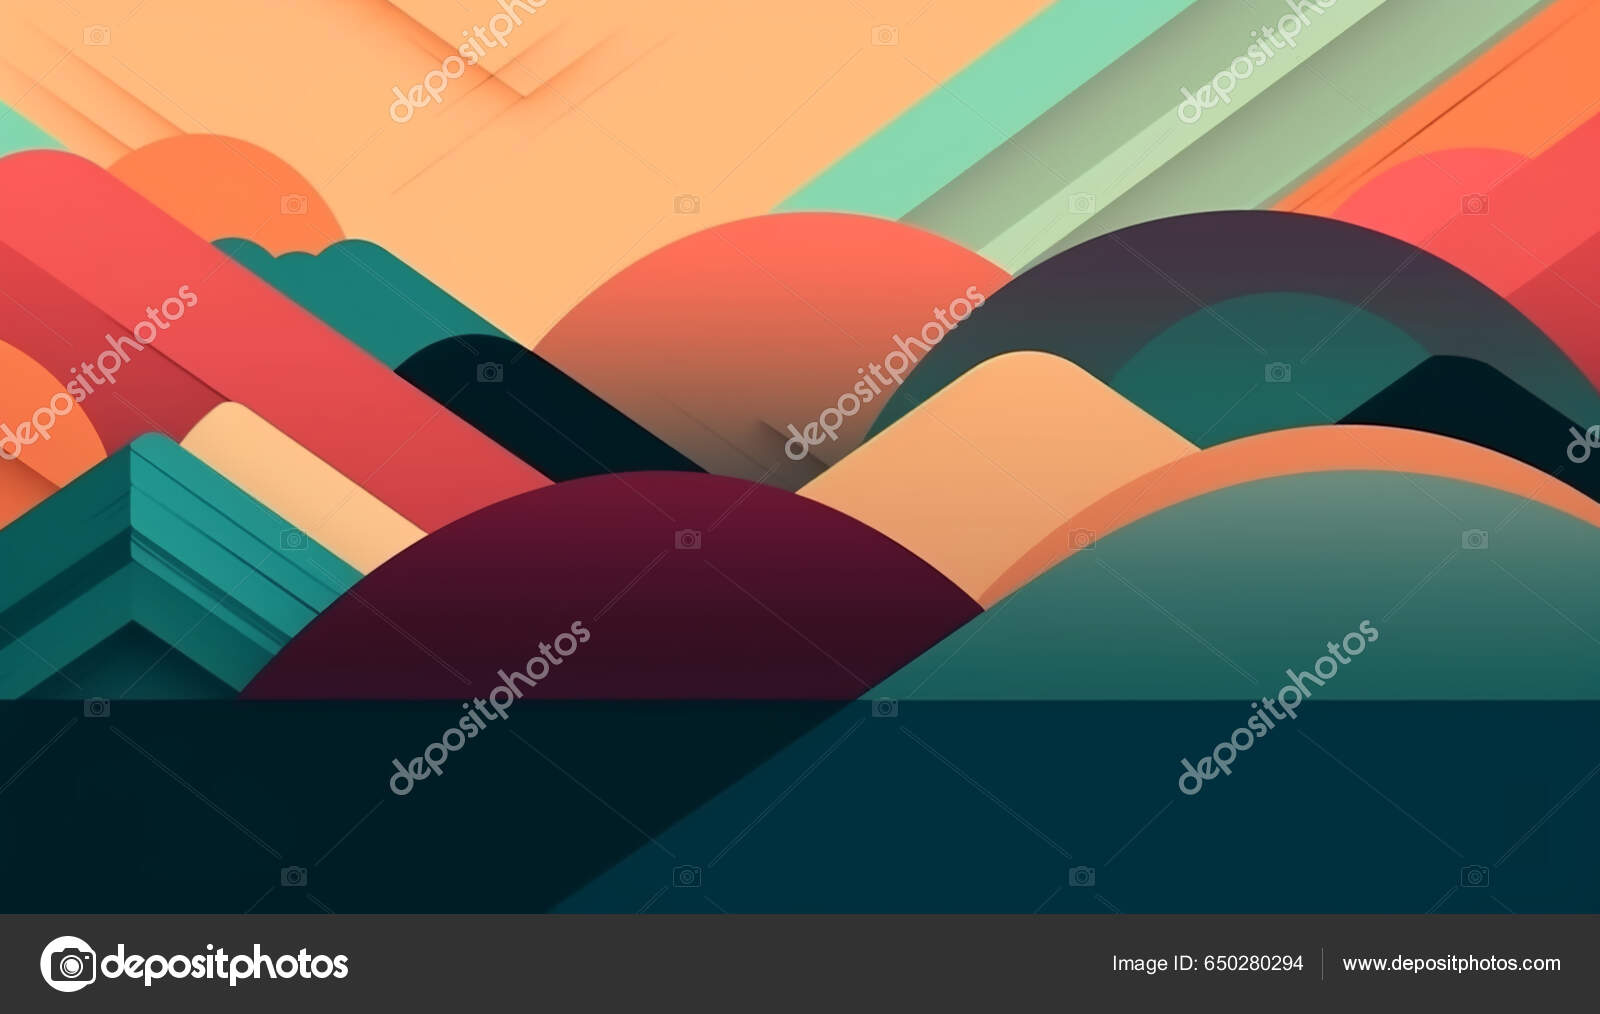 Simple Minimalist Retro Color Trendy Background Abstract Colorful Wallpaper  Backdrop Stock Photo by ©riosihombing@gmail.com 650281130